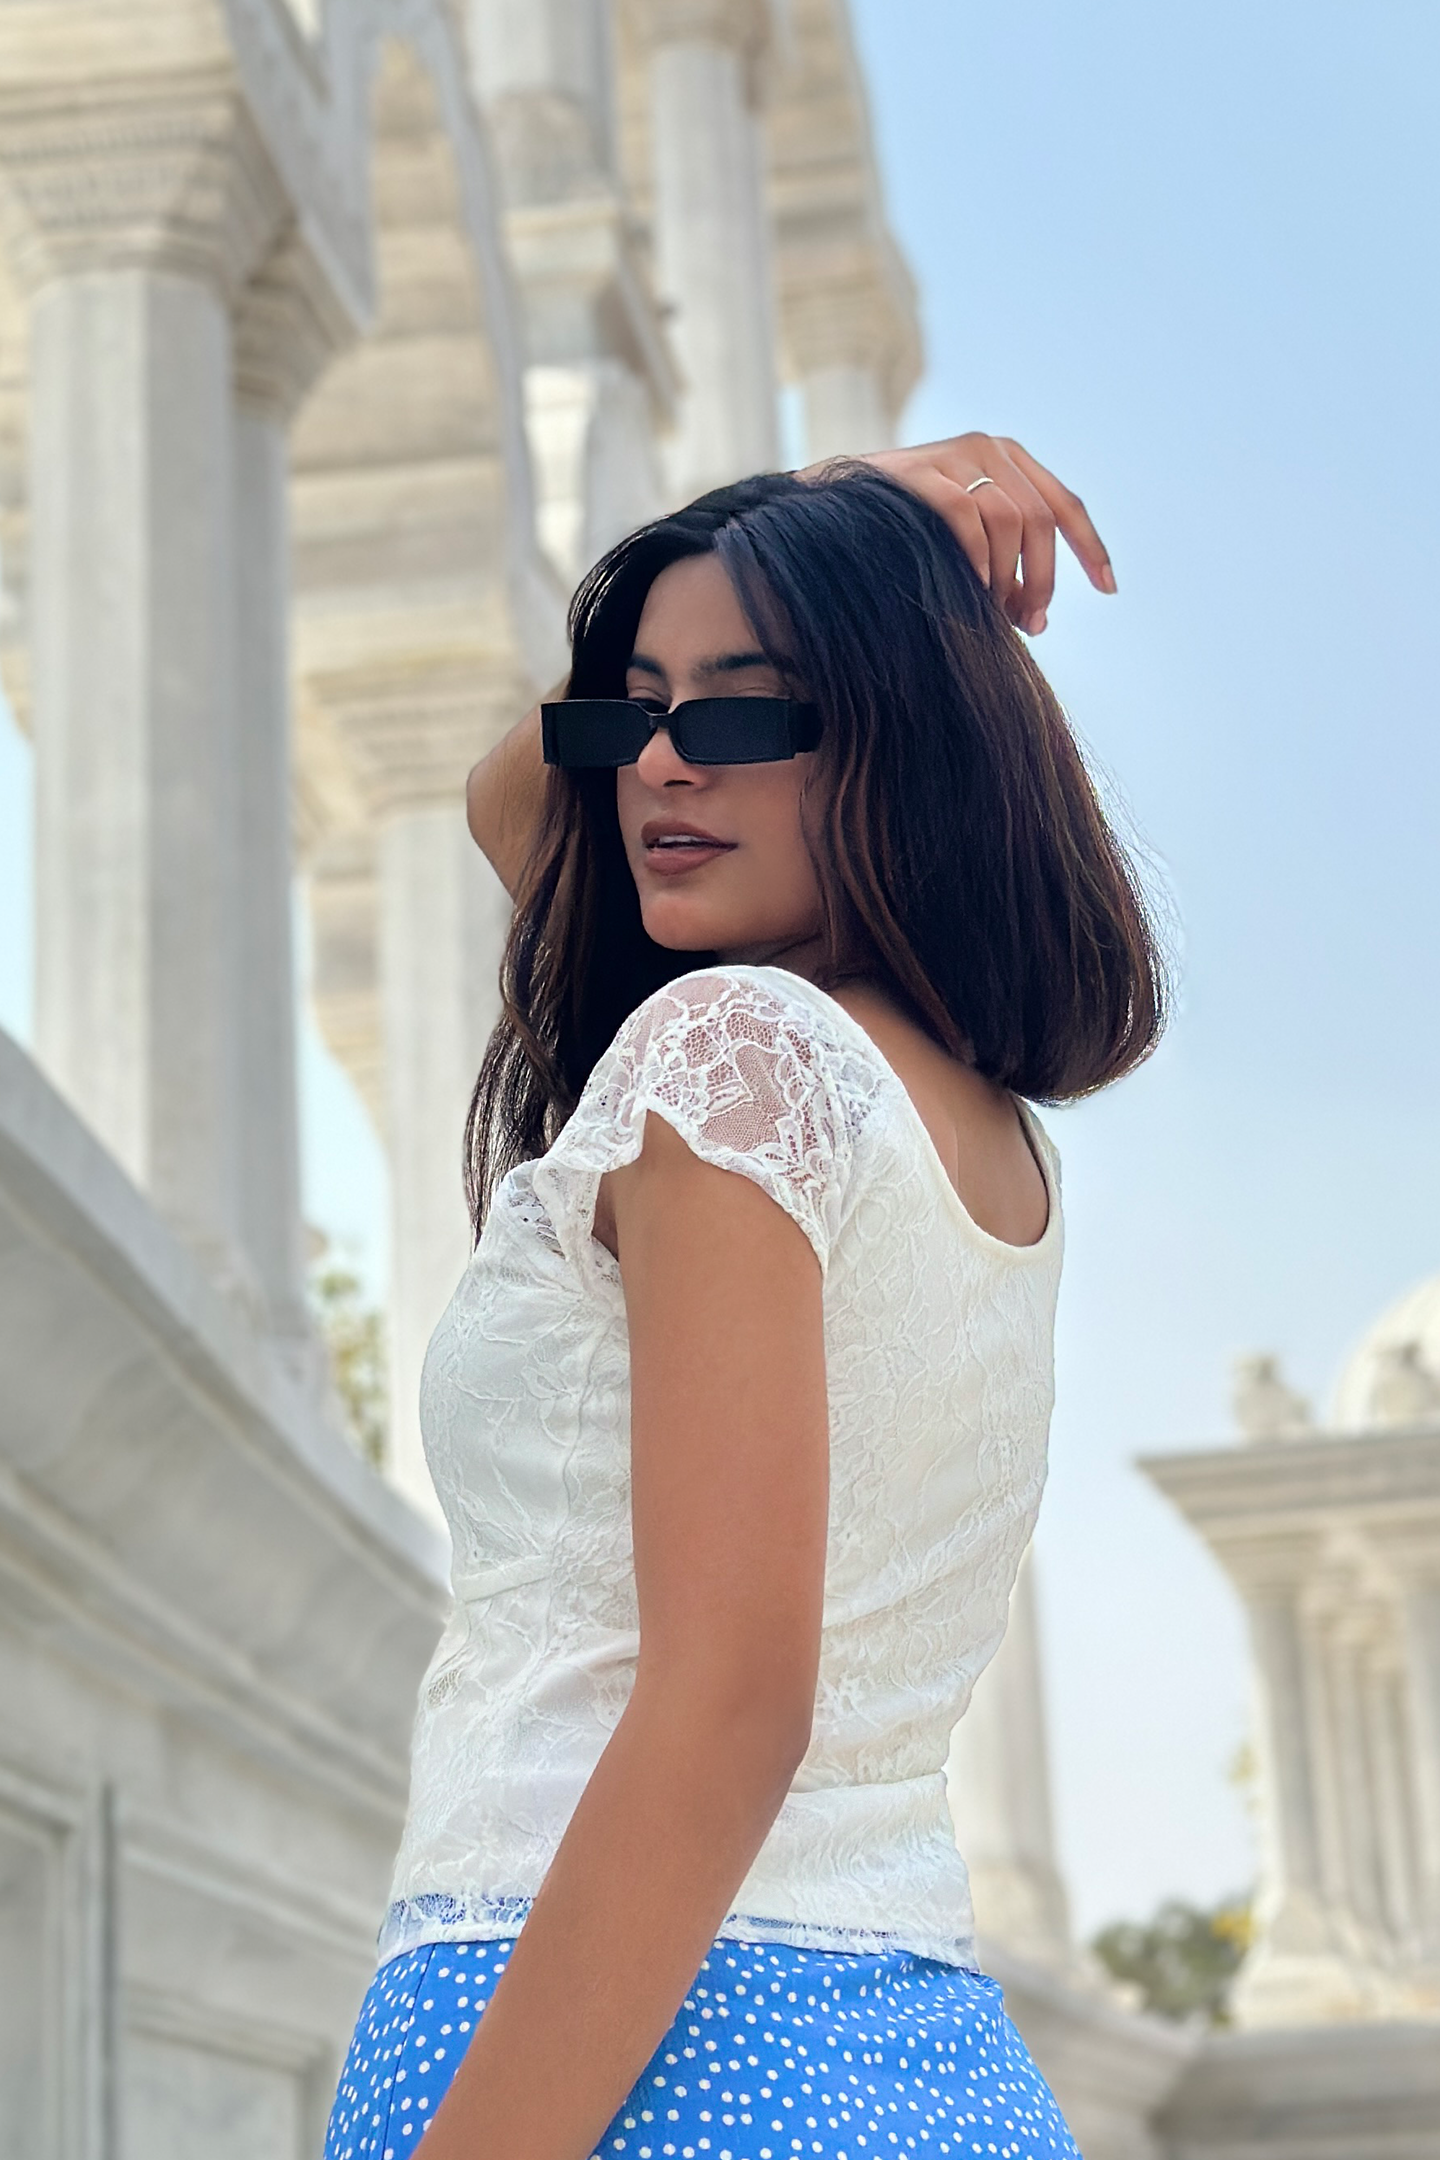 A woman models a Ronazen white lace top featuring delicate floral patterns. The top has short, scalloped sleeves and a soft, rounded neckline, emphasizing a gentle, feminine aesthetic. The fabric's semi-sheer quality adds a touch of elegance and sophistication, while the fitted silhouette provides a flattering fit. The background is neutral to highlight the intricate details of the lace